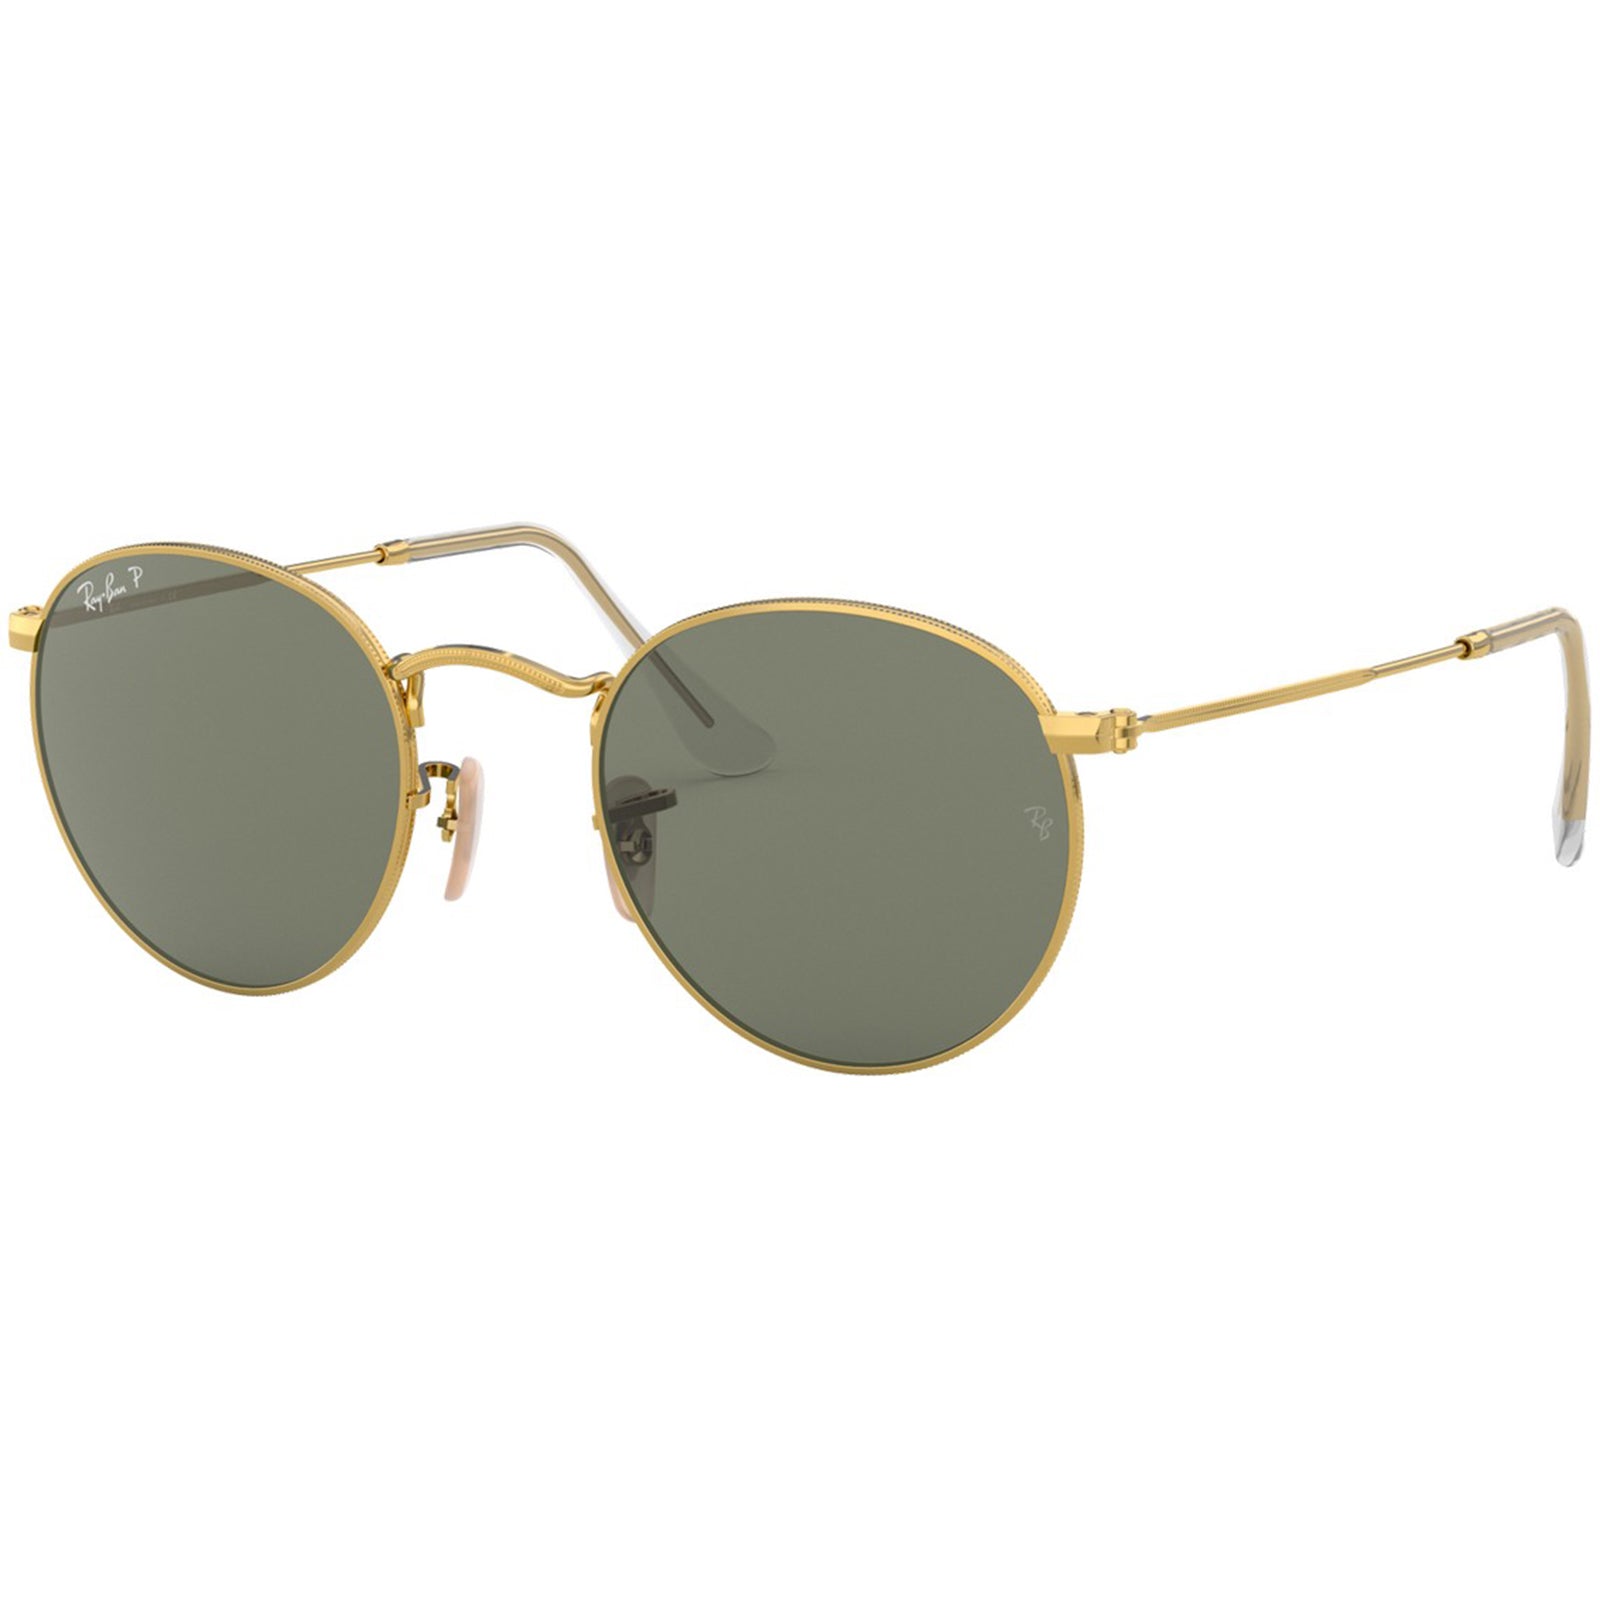 Ray-Ban Round Metal Adult Lifestyle Polarized Sunglasses-0RB3447